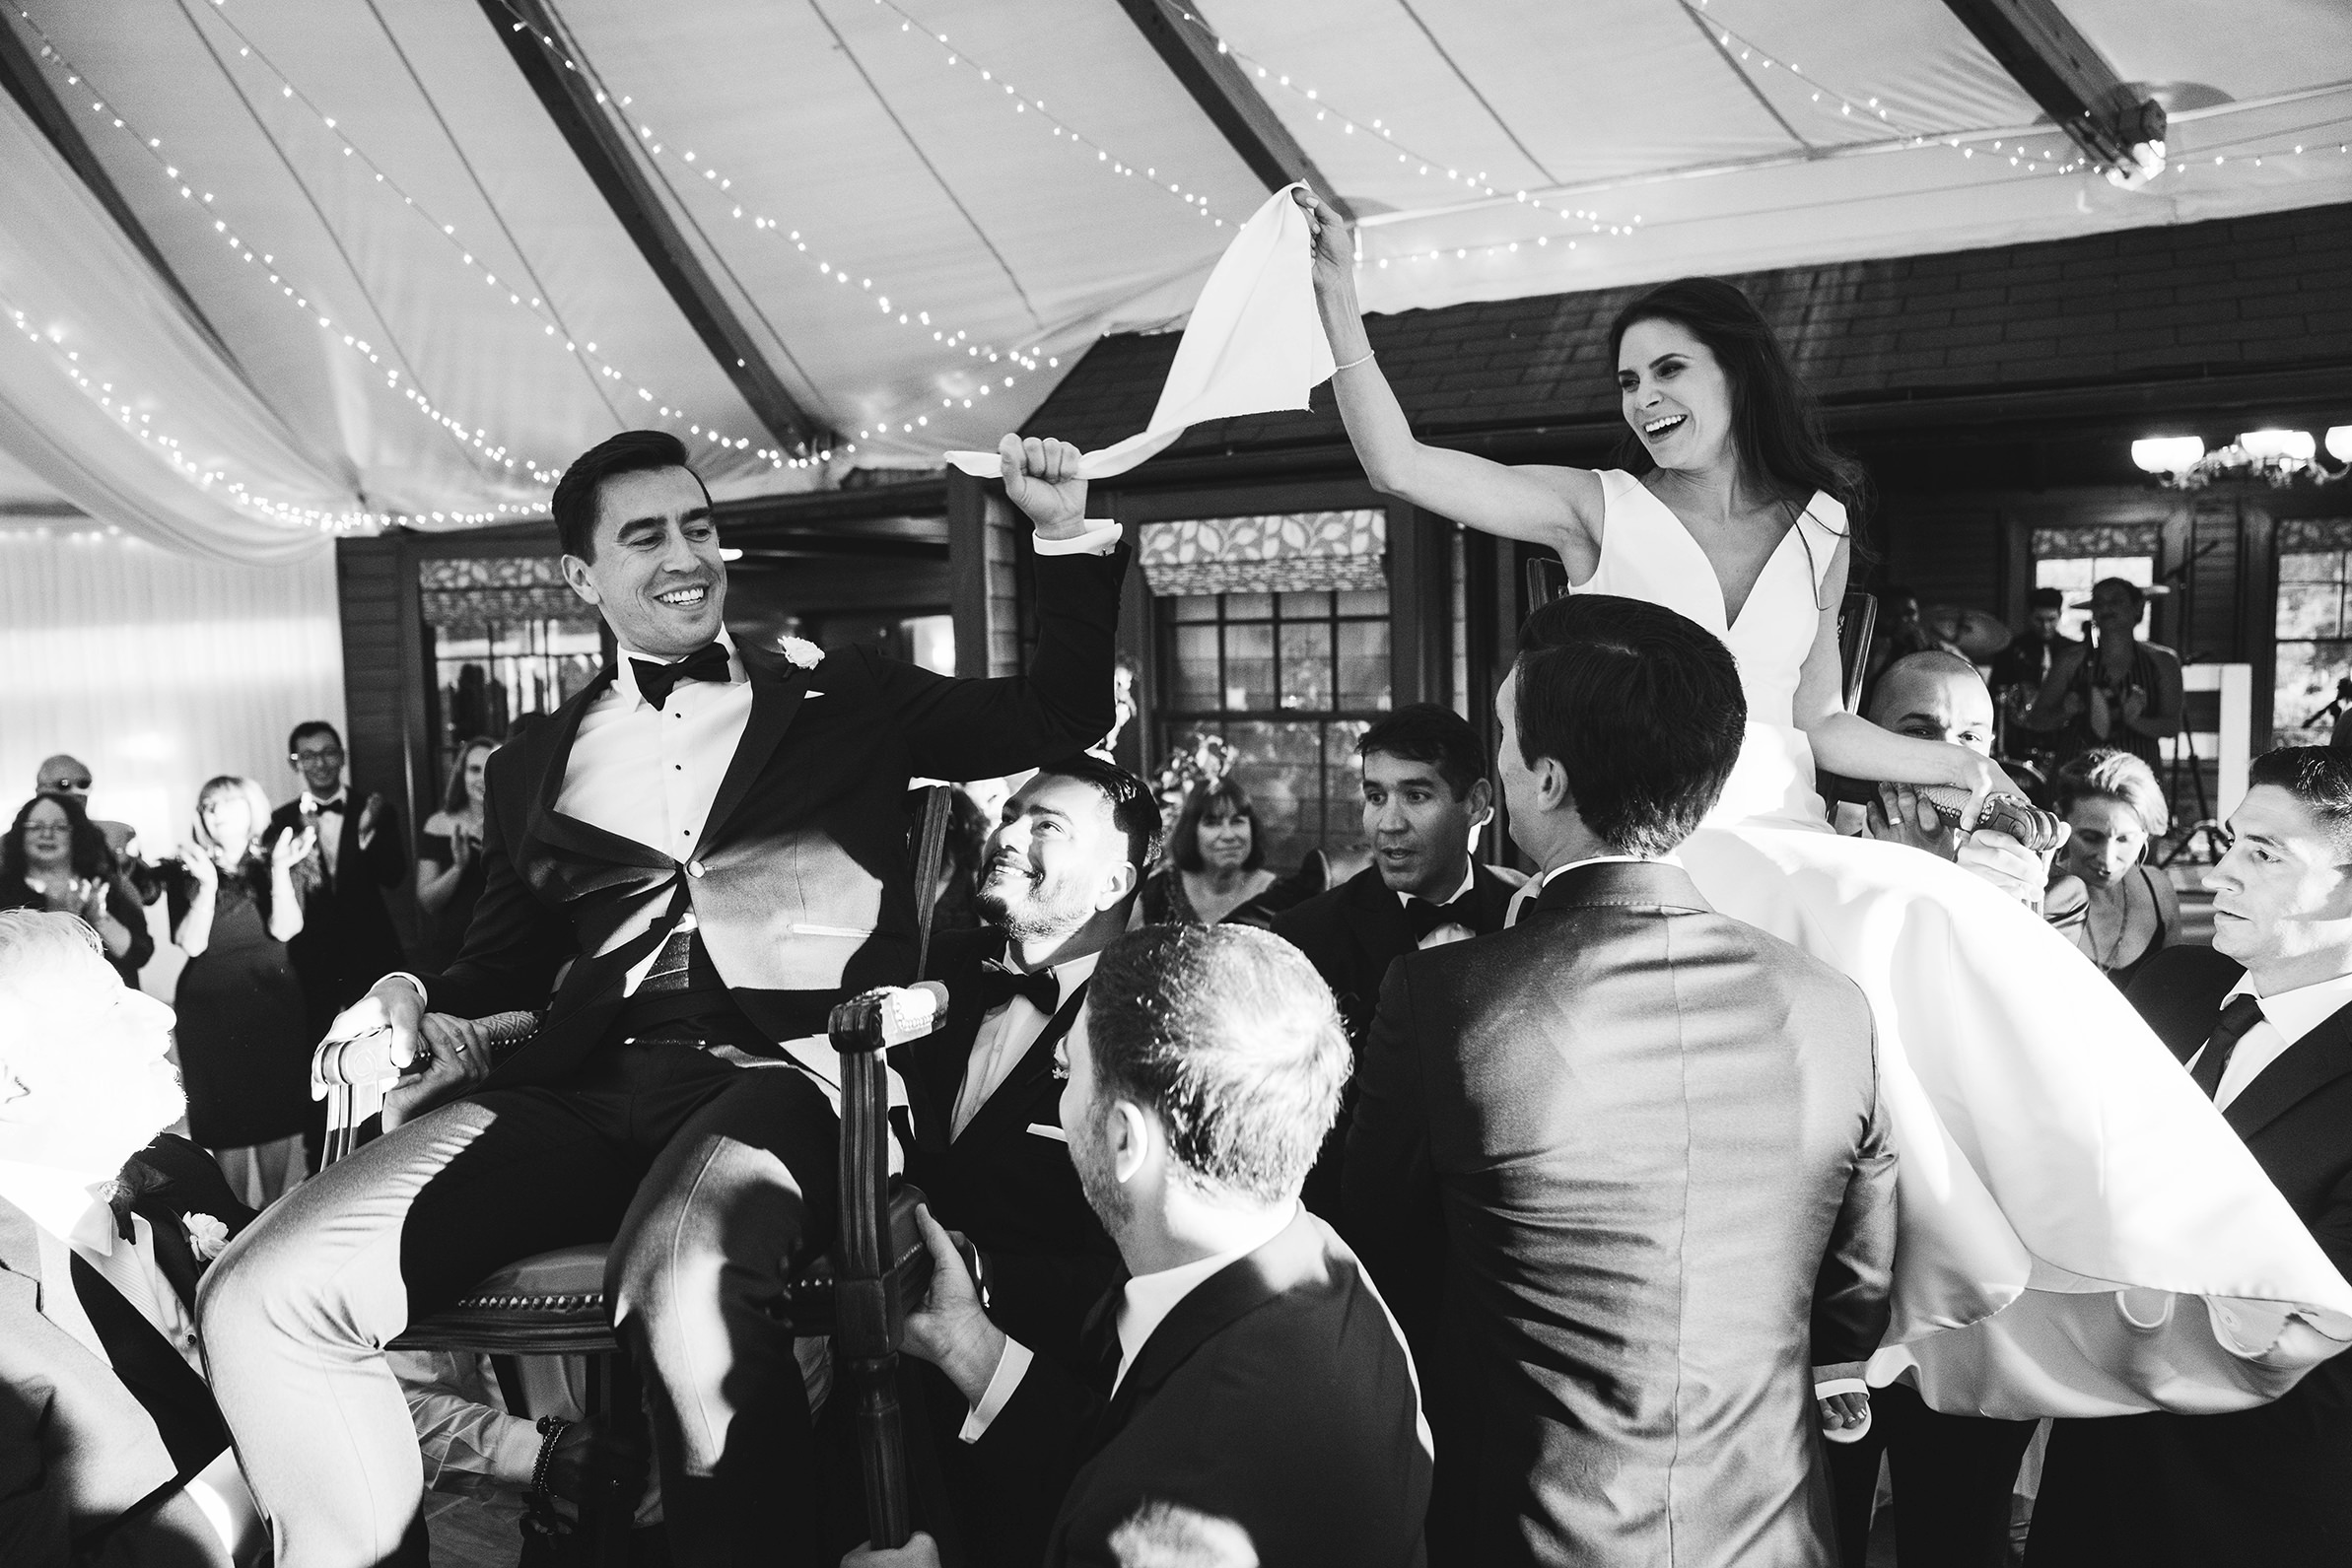 A documentary photograph featured in the best of wedding photography of 2019 showing a bride and groom dancing during the hora